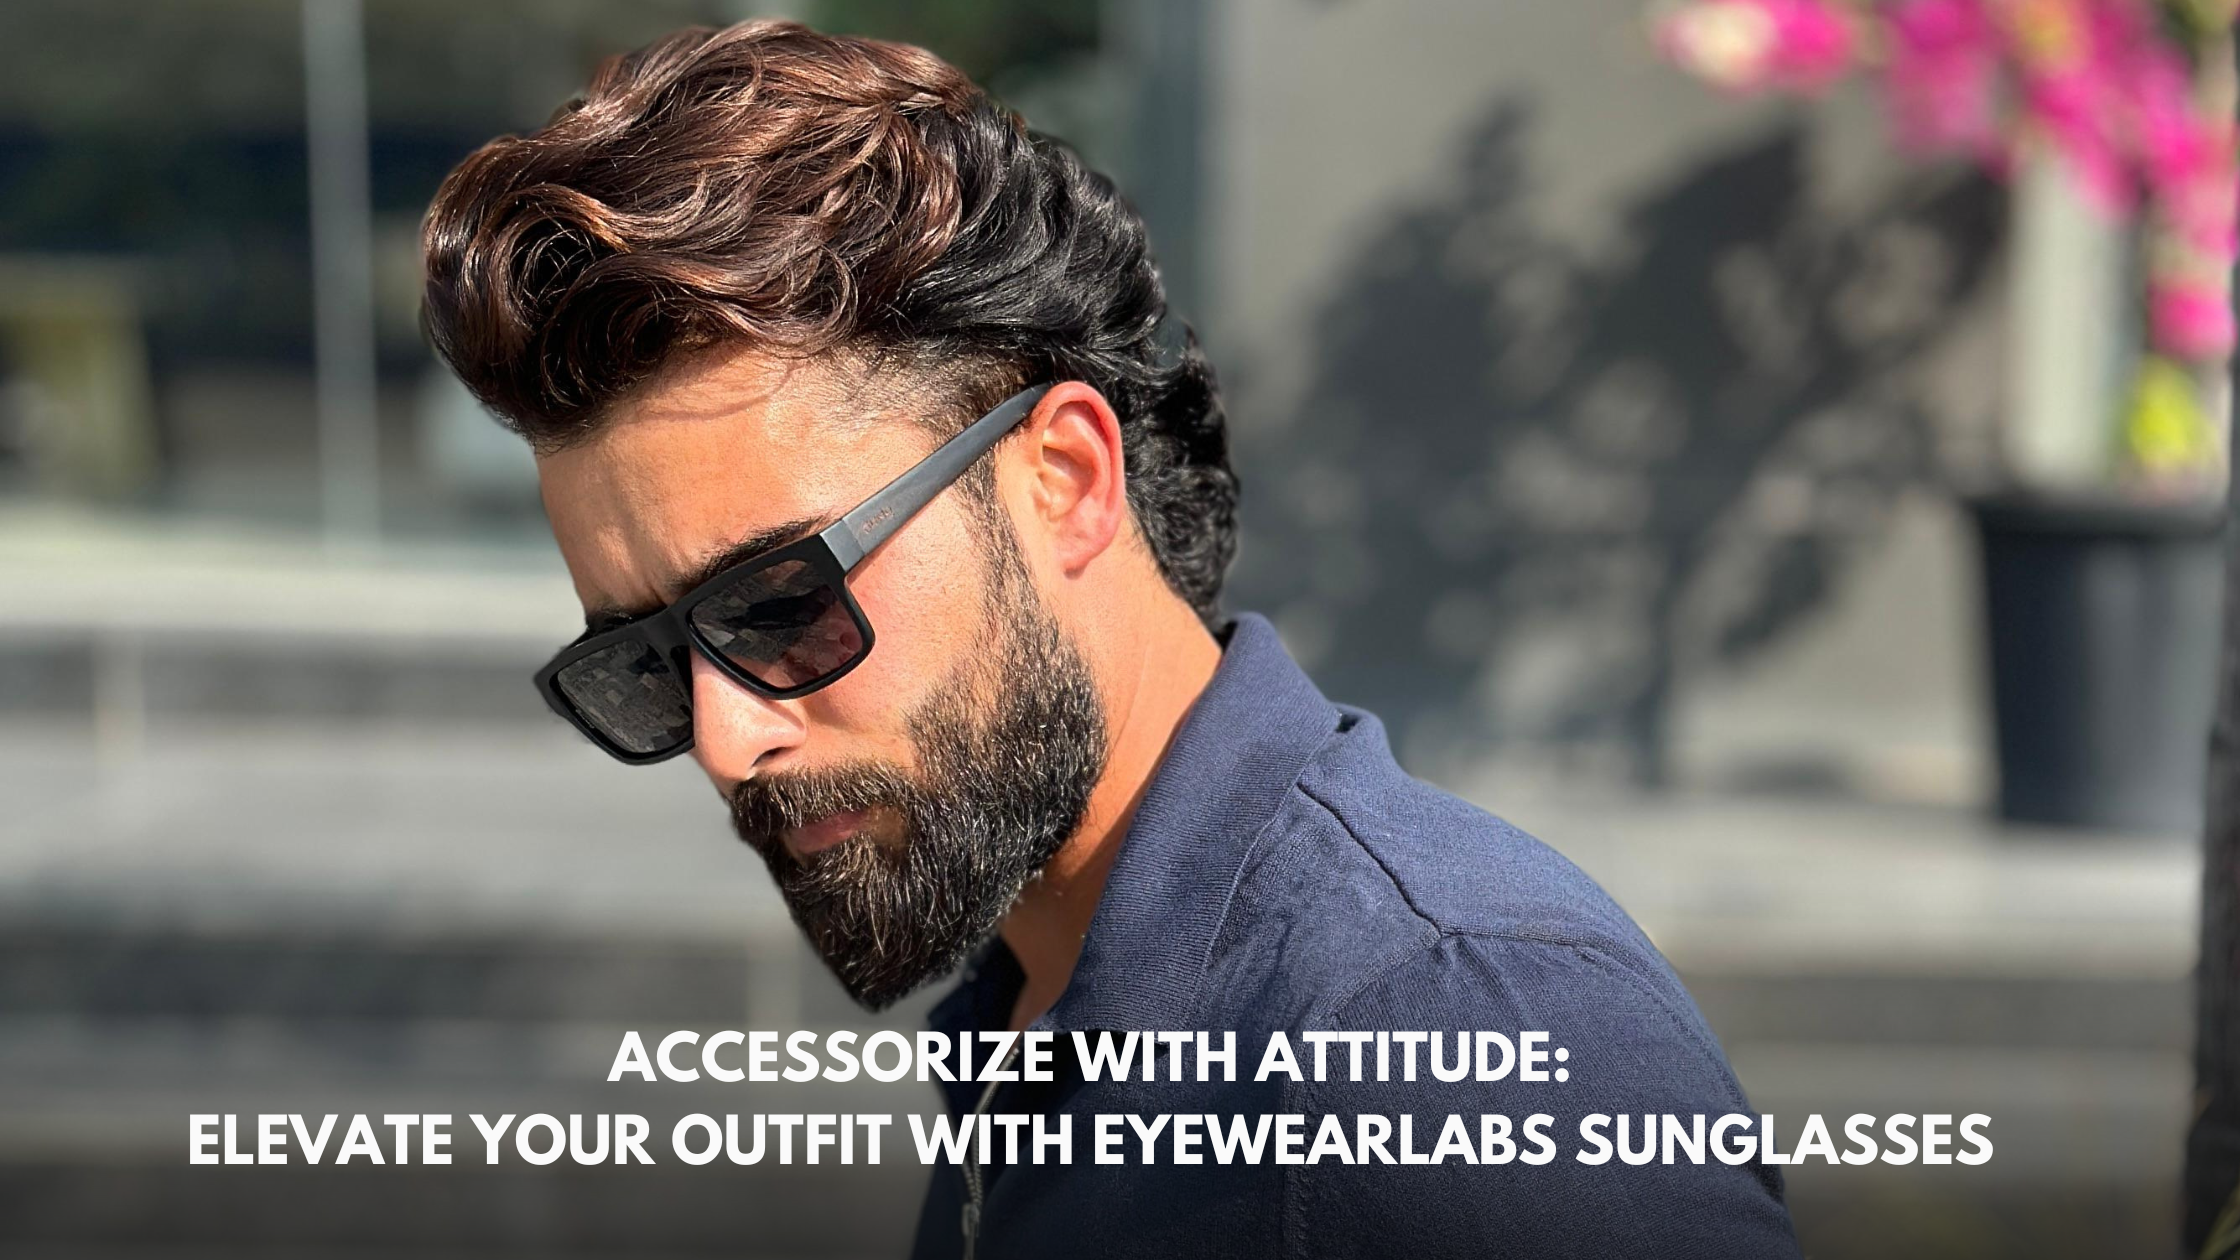 Accessorize with Attitude: Elevate Your Outfit with Eyewearlabs Sunglasses